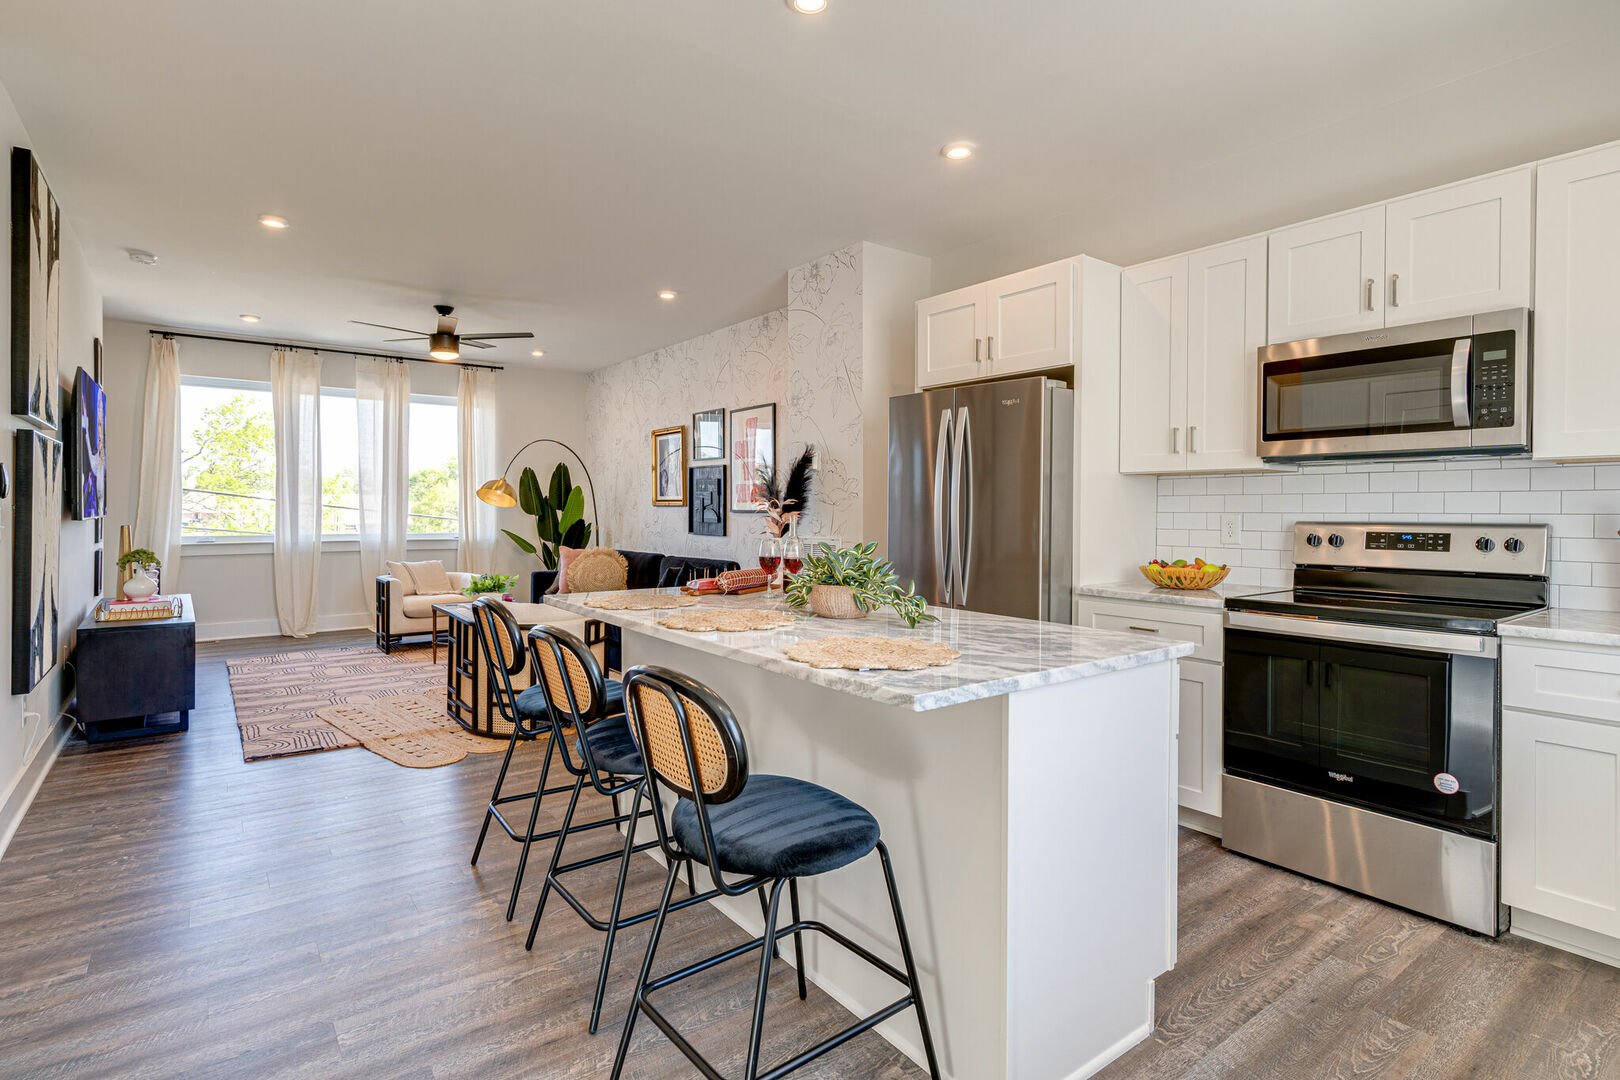 1st Unit, 2nd Floor: Open kitchen with stainless steel appliances, large island, breakfast bar seating, and is fully equipped with your basic cooking essentials.